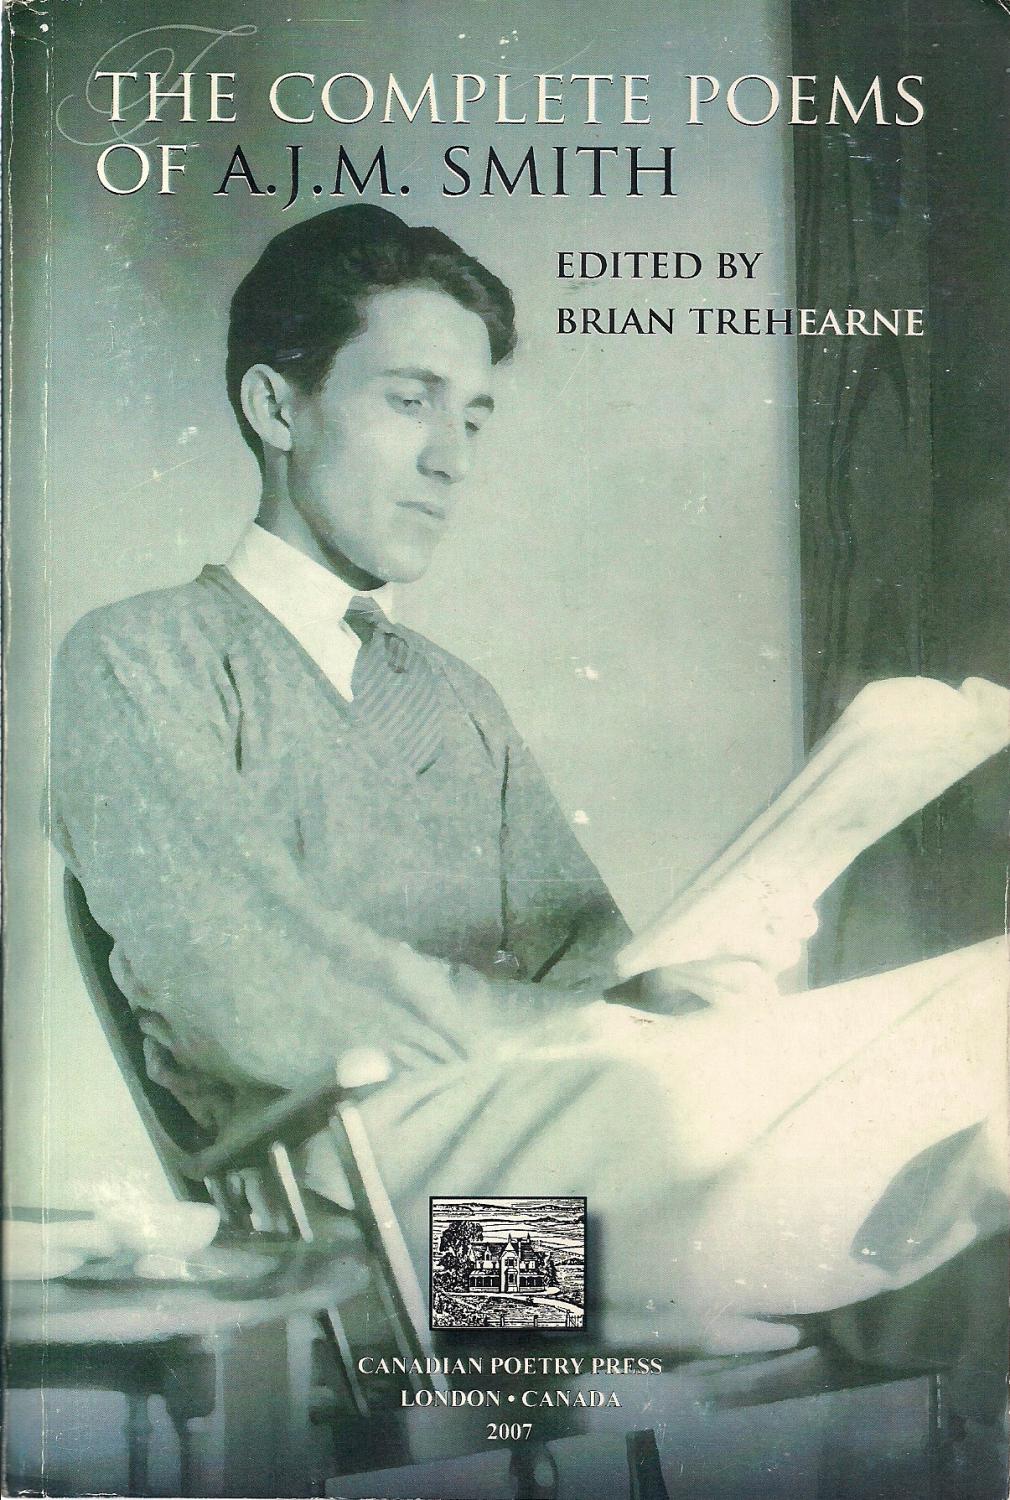 The Complete Poems of A.J.M. Smith - A. J. M. Smith; Brian Trehearne [Editor]